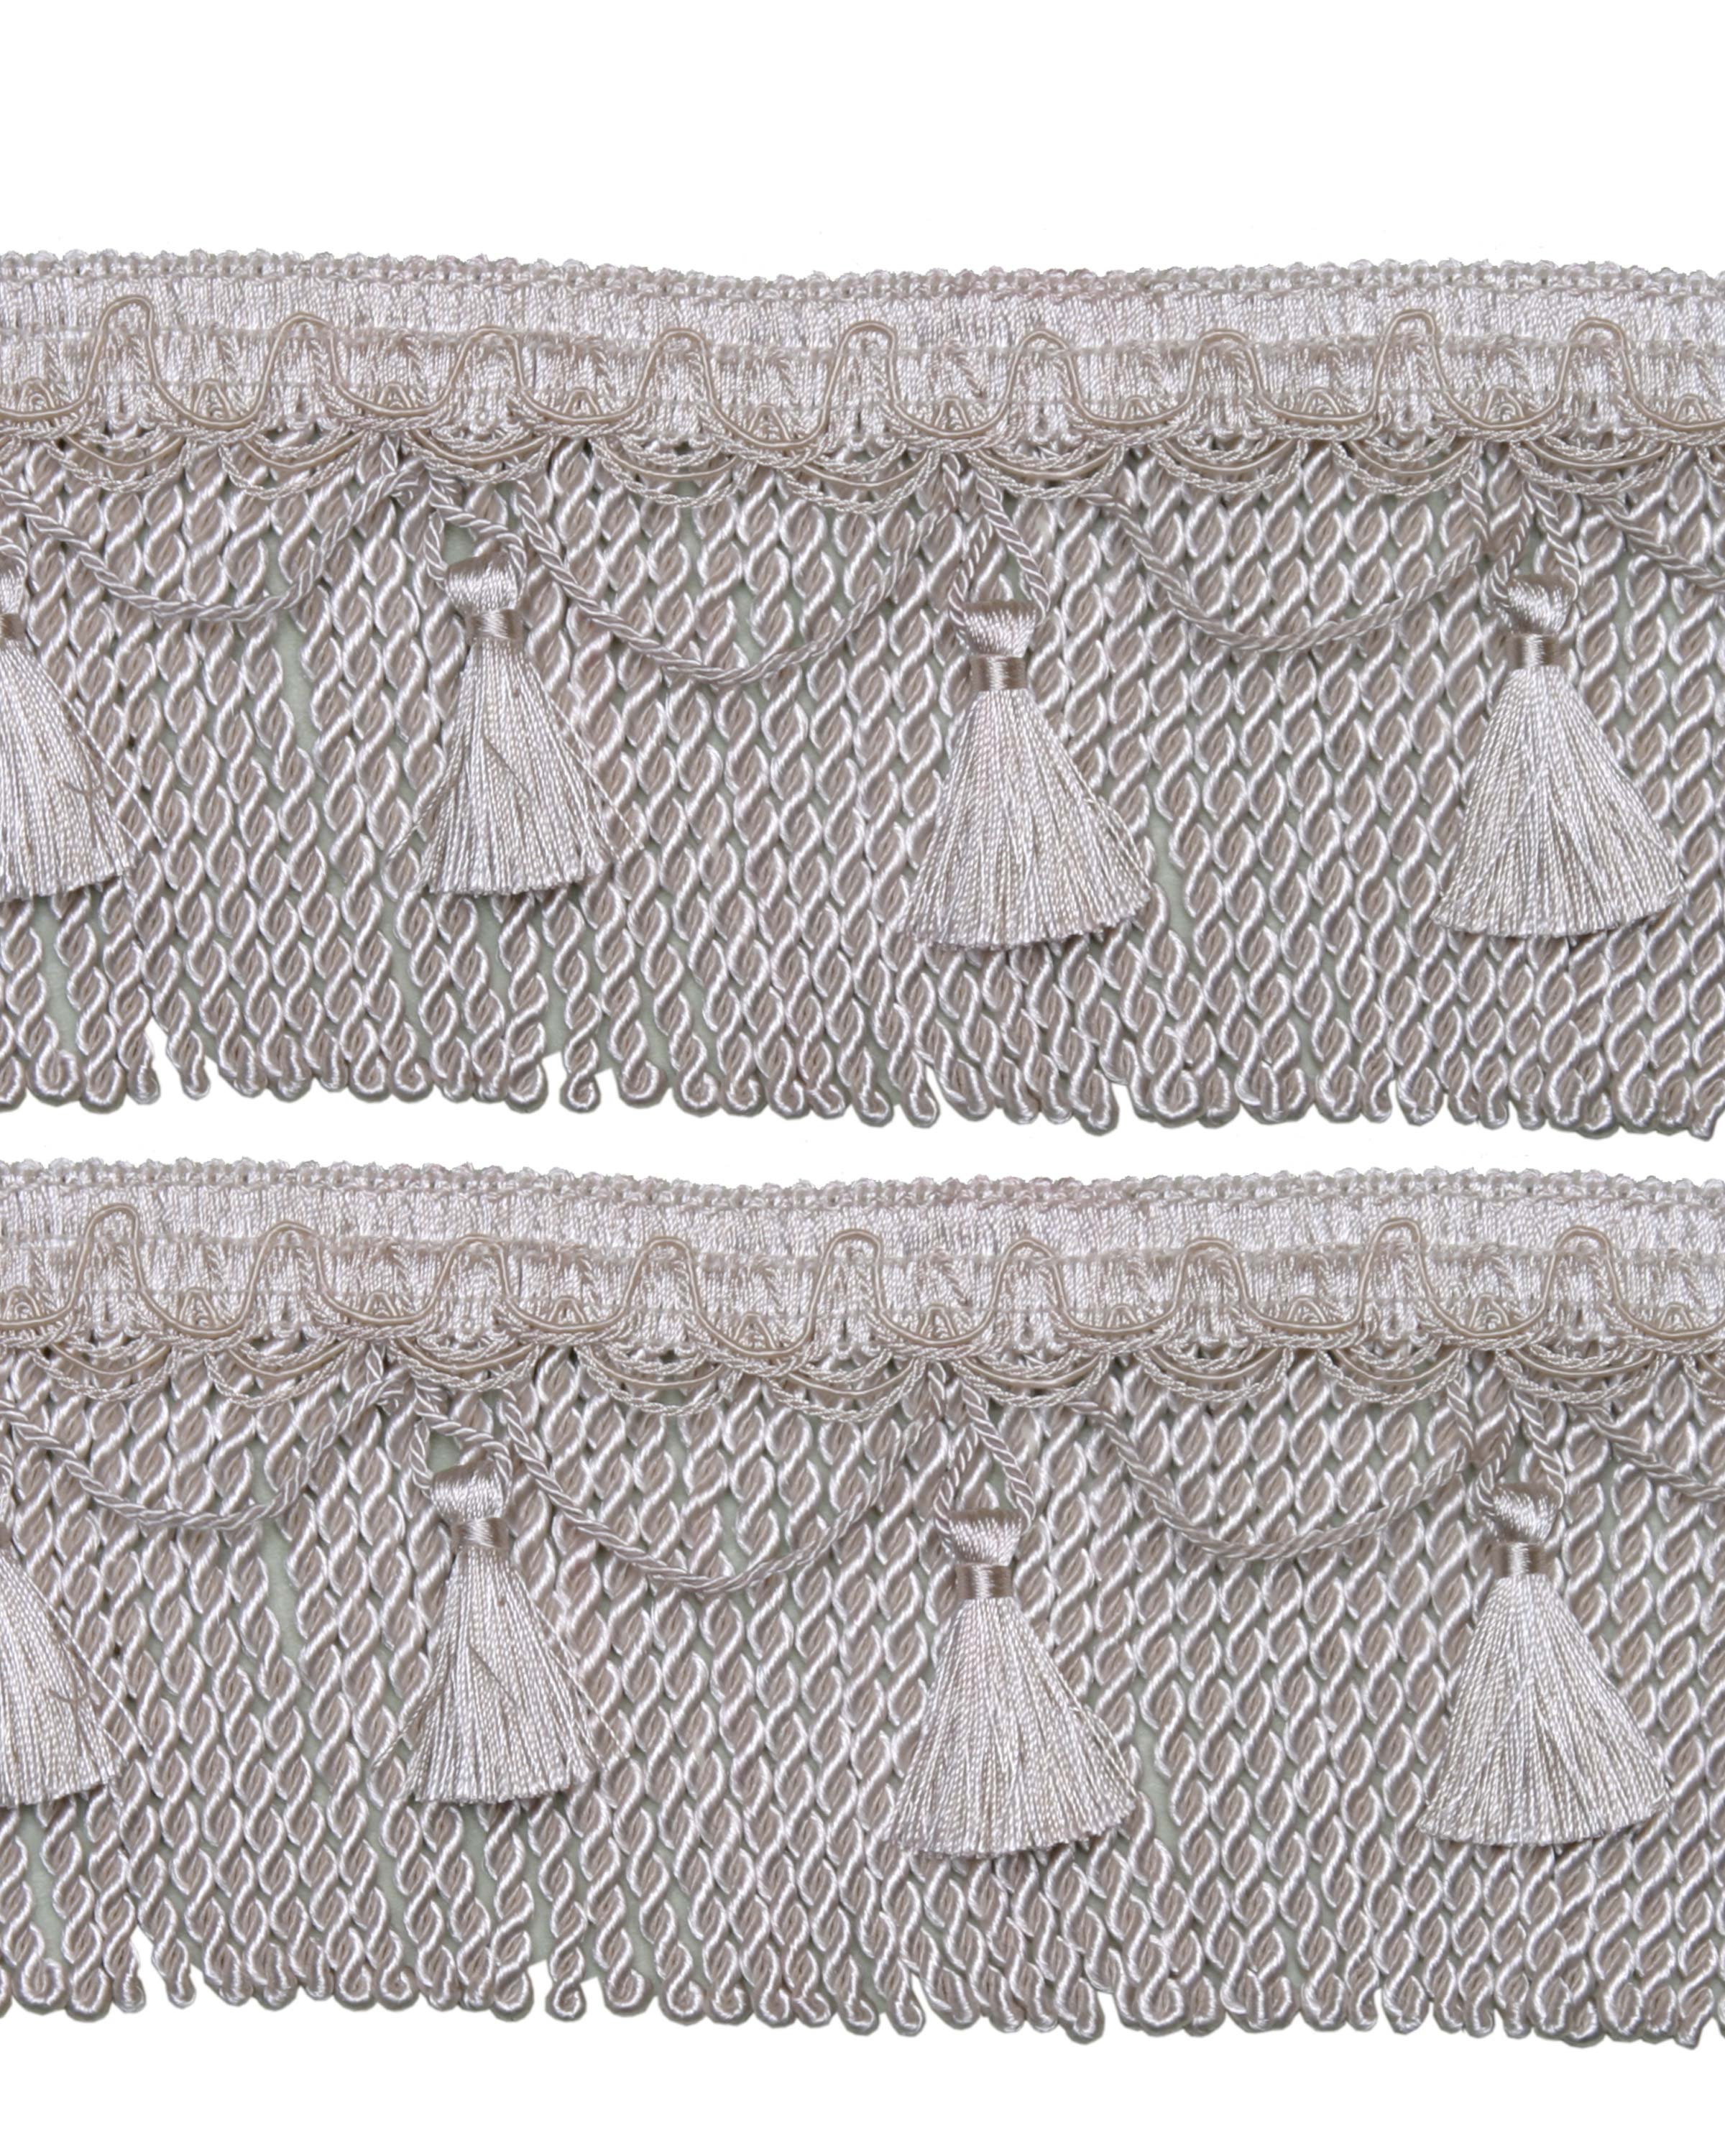 Bullion Cord Fringe on Braid with Scalloped Tassel - Cream 105mm Price is for 5 metres